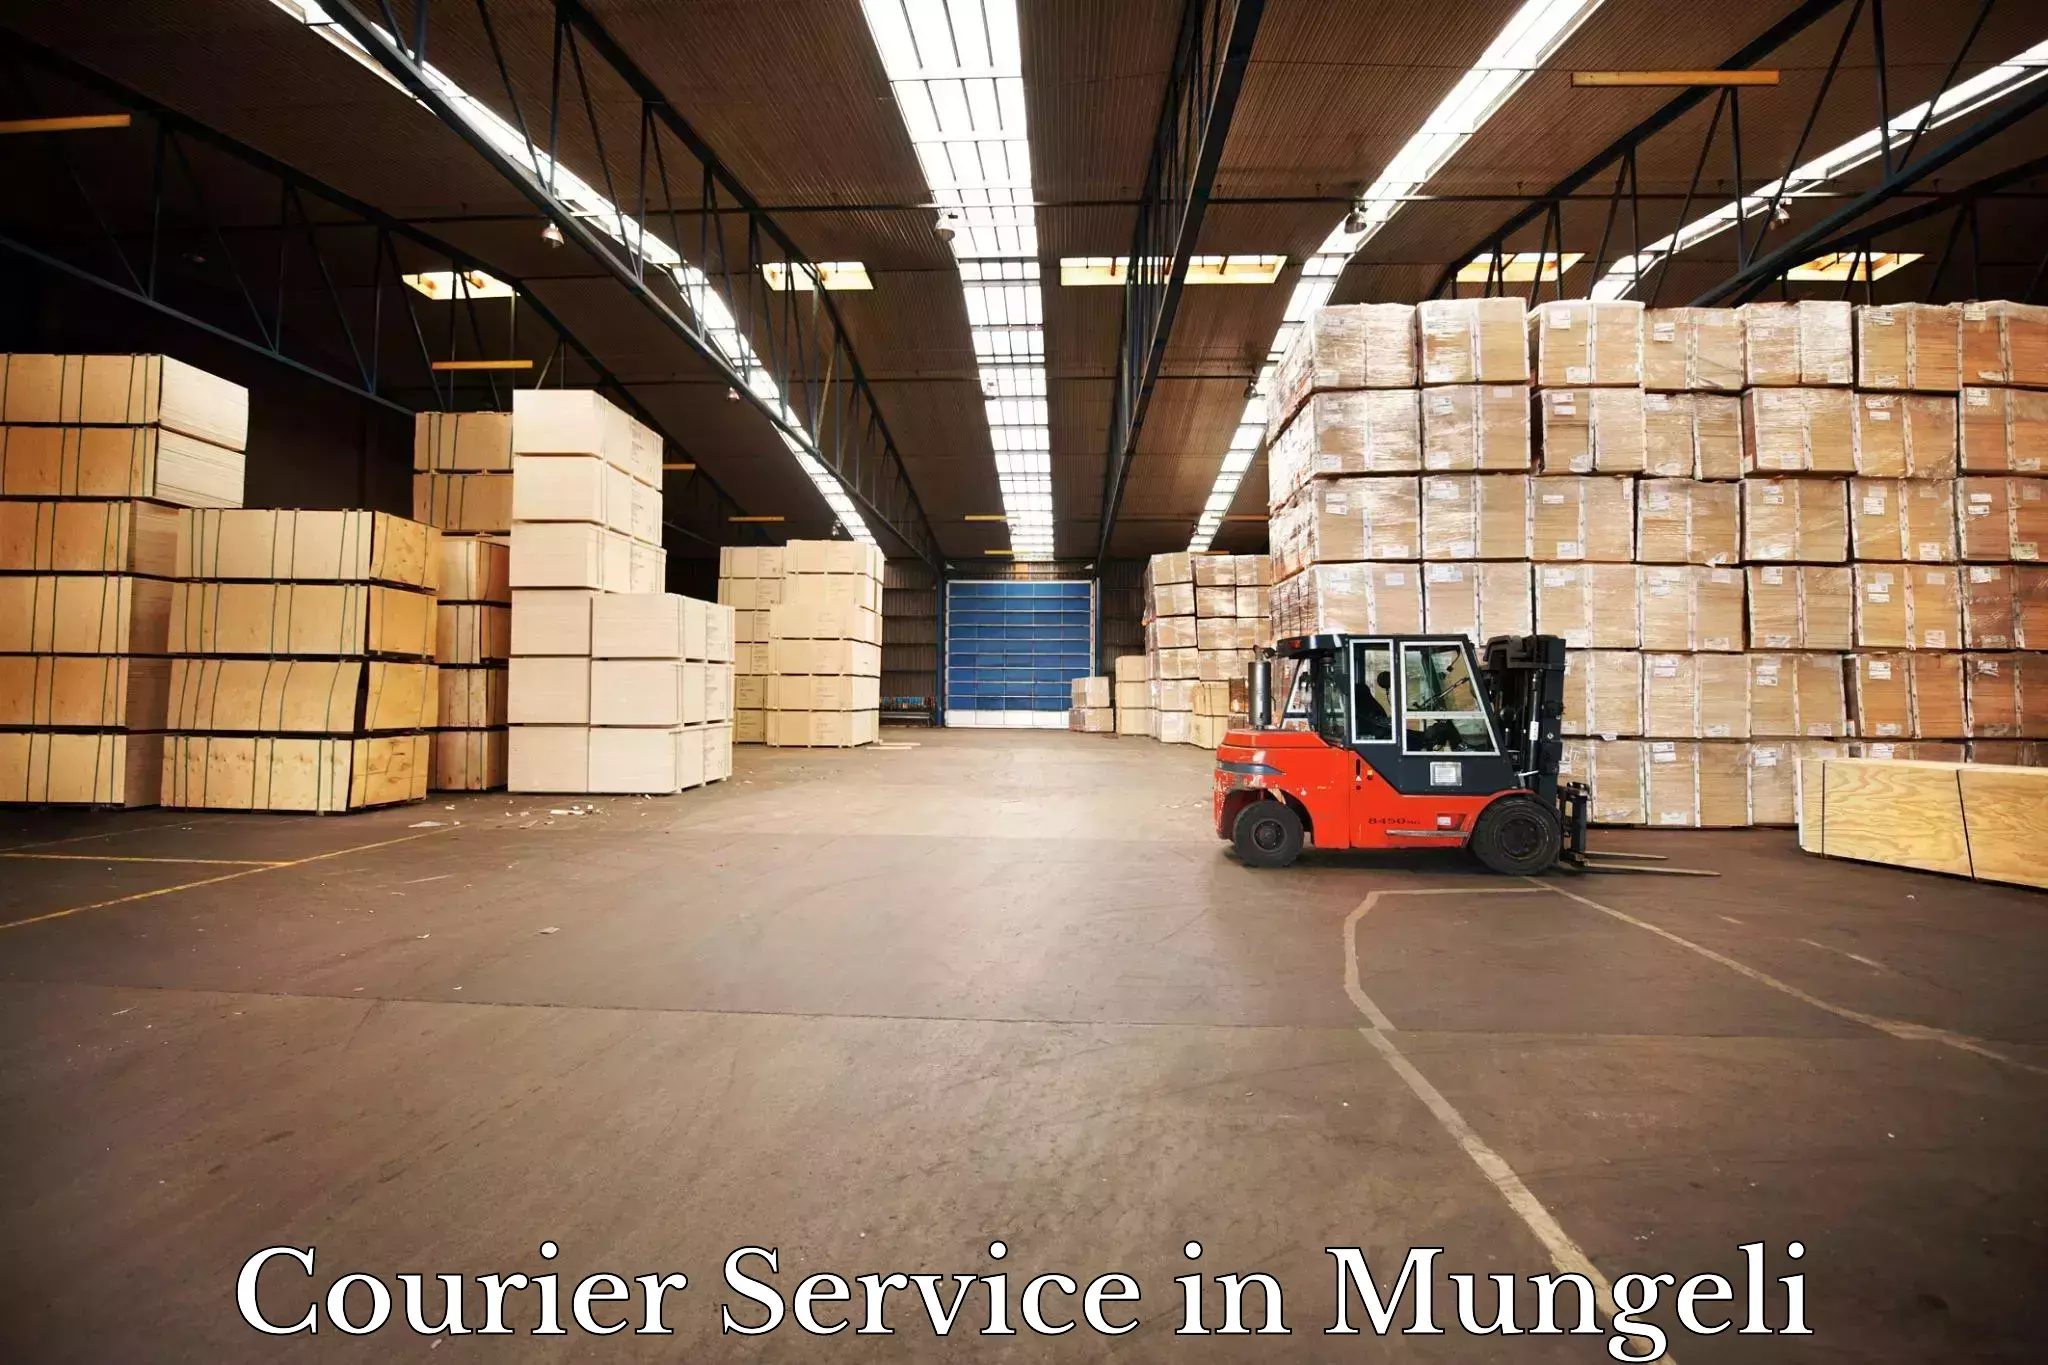 Express delivery capabilities in Mungeli